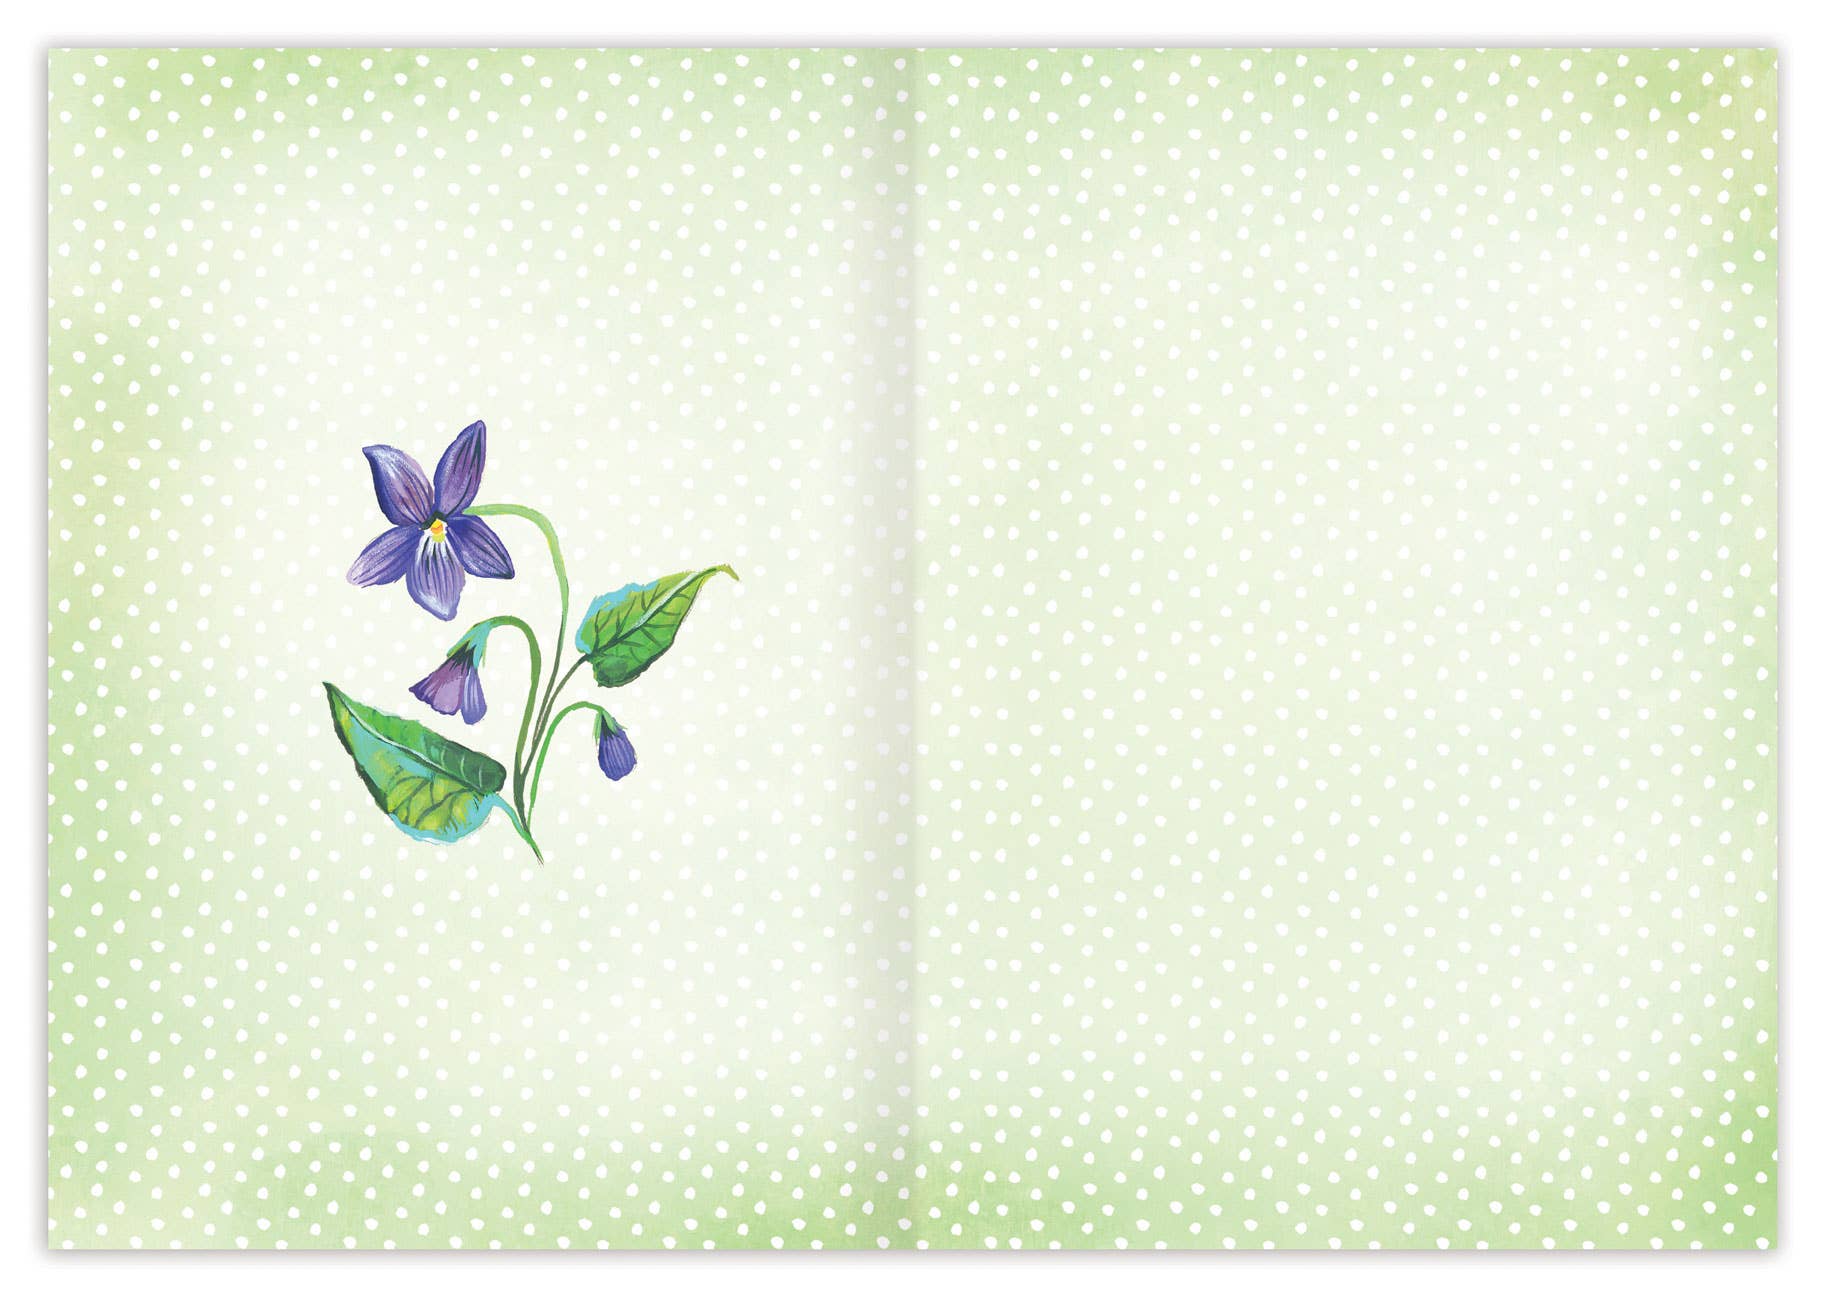 Lavender Moonflowers Thank You Card